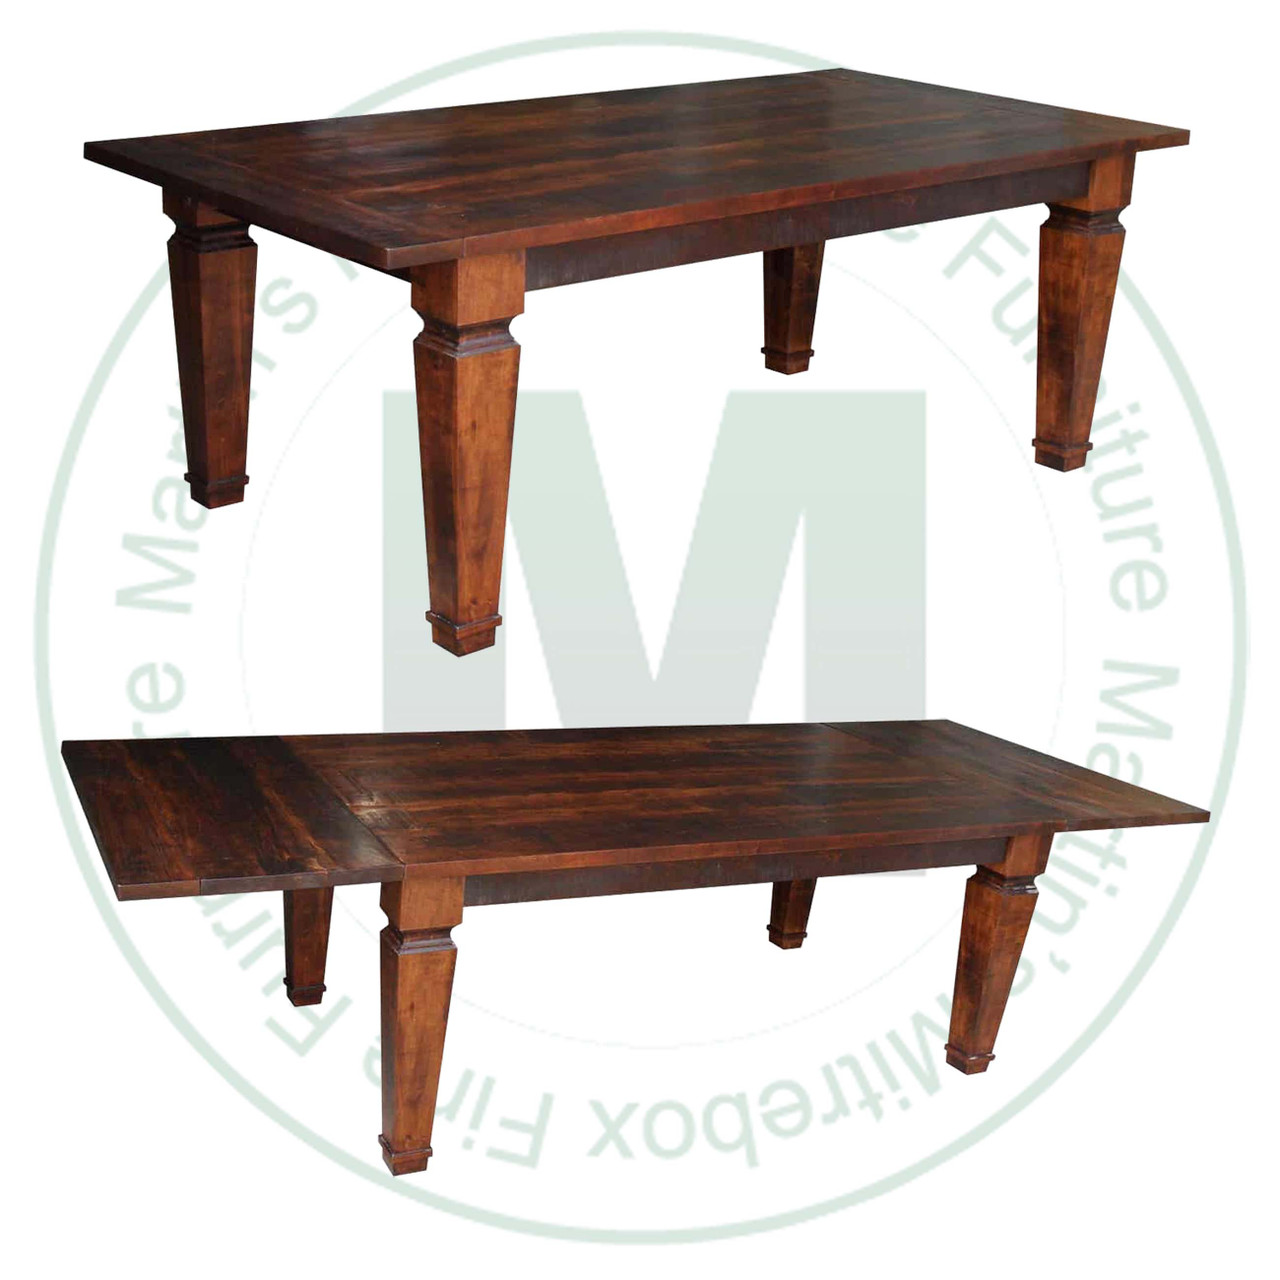 Wormy Maple Century Solid Top Harvest Table 36'' Deep x 72'' Wide x 30'' High With 2 - 16'' Leaves